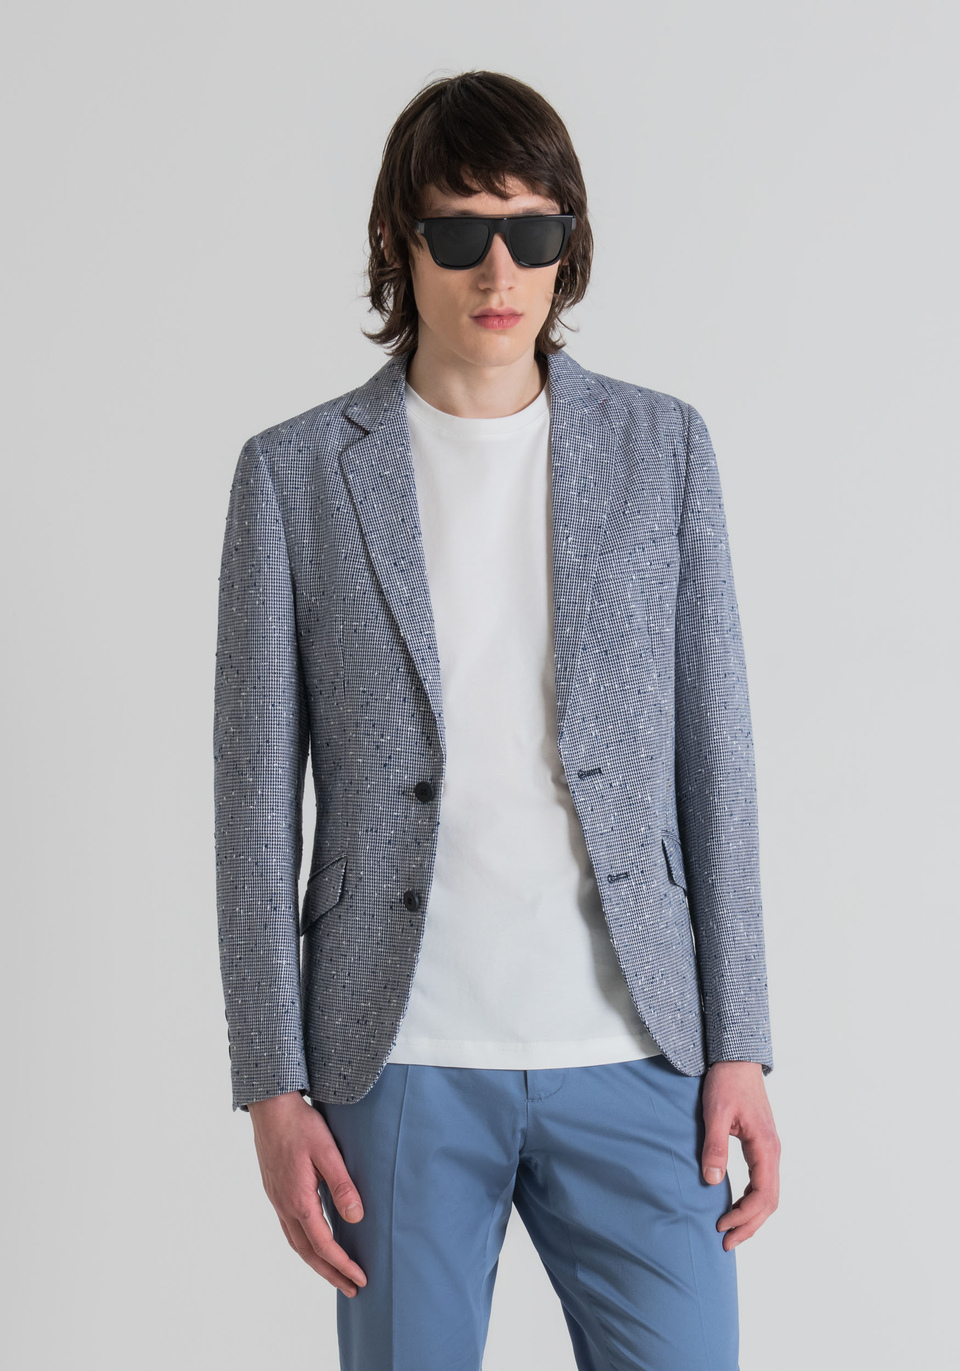 SLIM-FIT “KIRSTEN” JACKET A LINEN BLEND WITH NEPS | Antony Morato